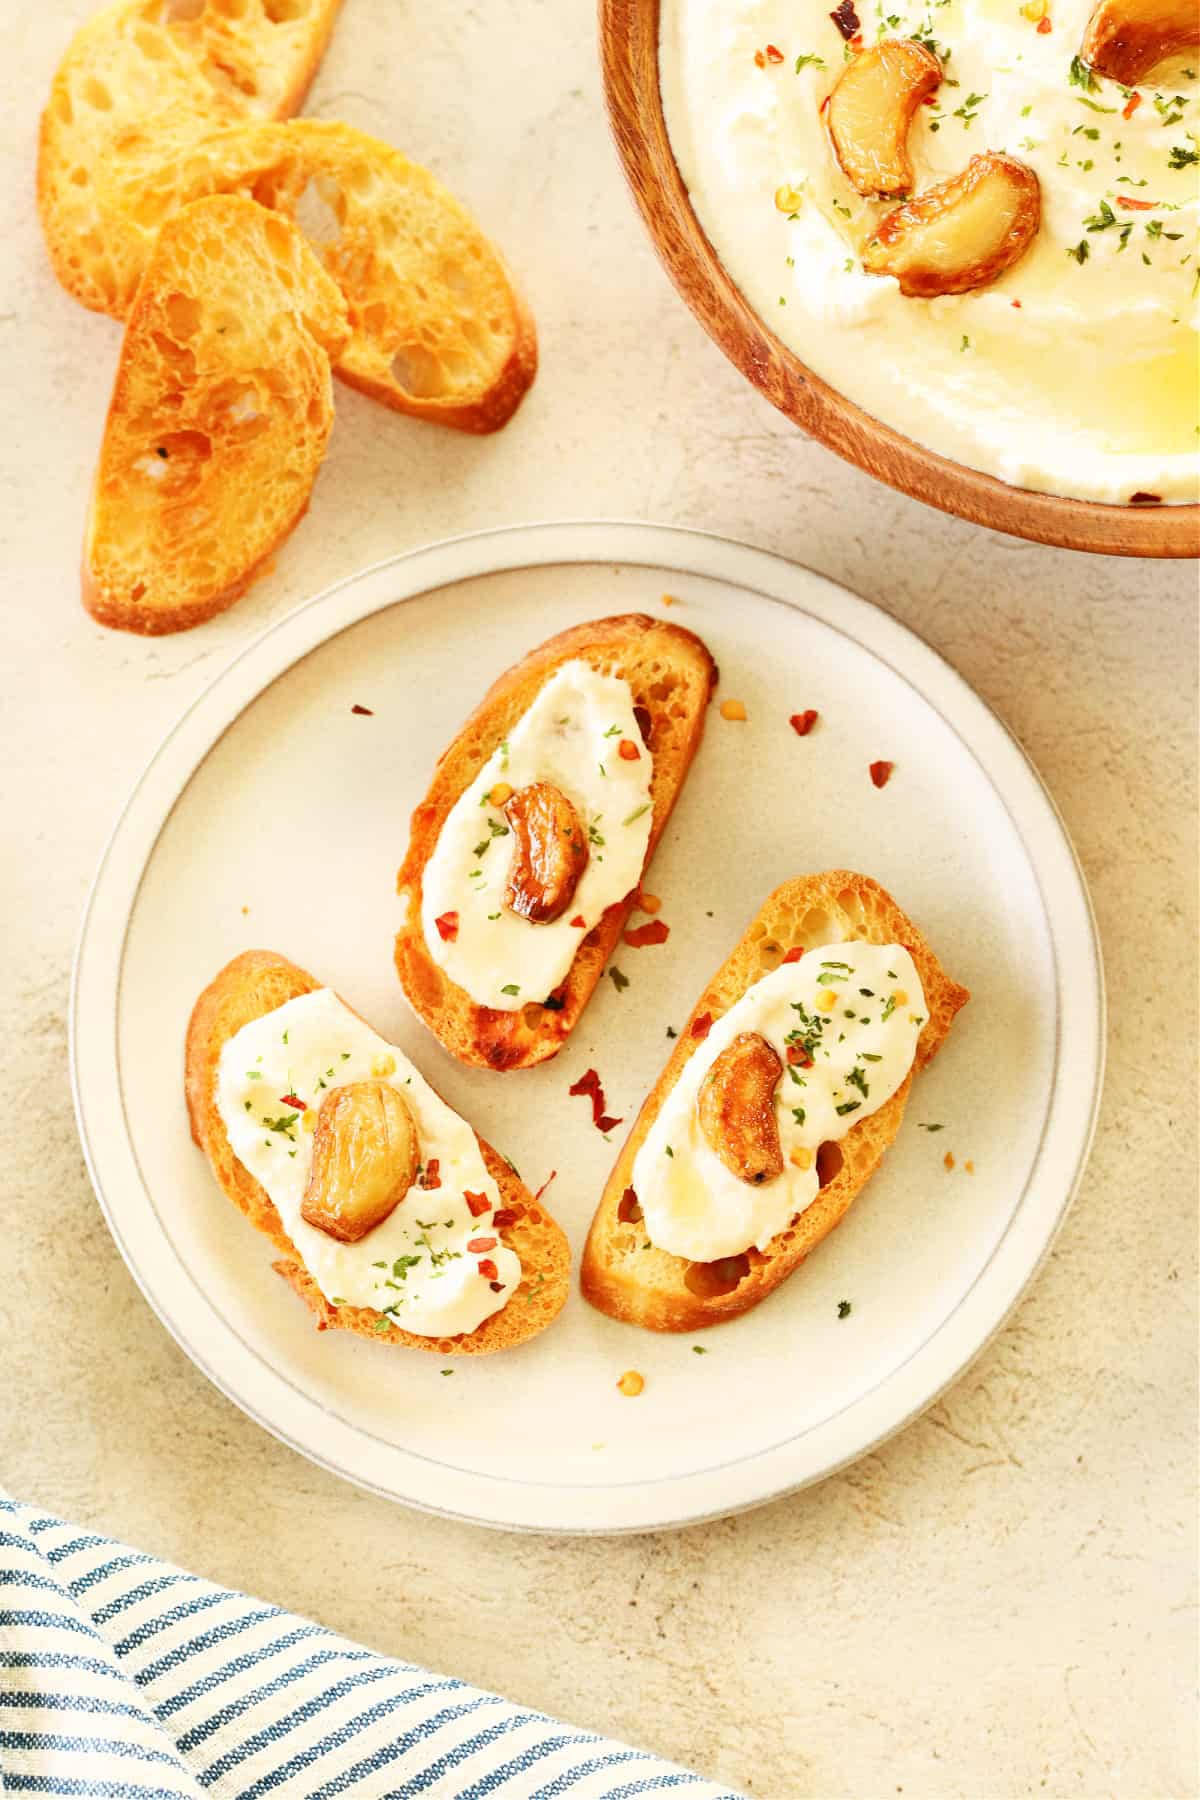 Three slices of baguette with feta dip and roasted garlic on a small plate.